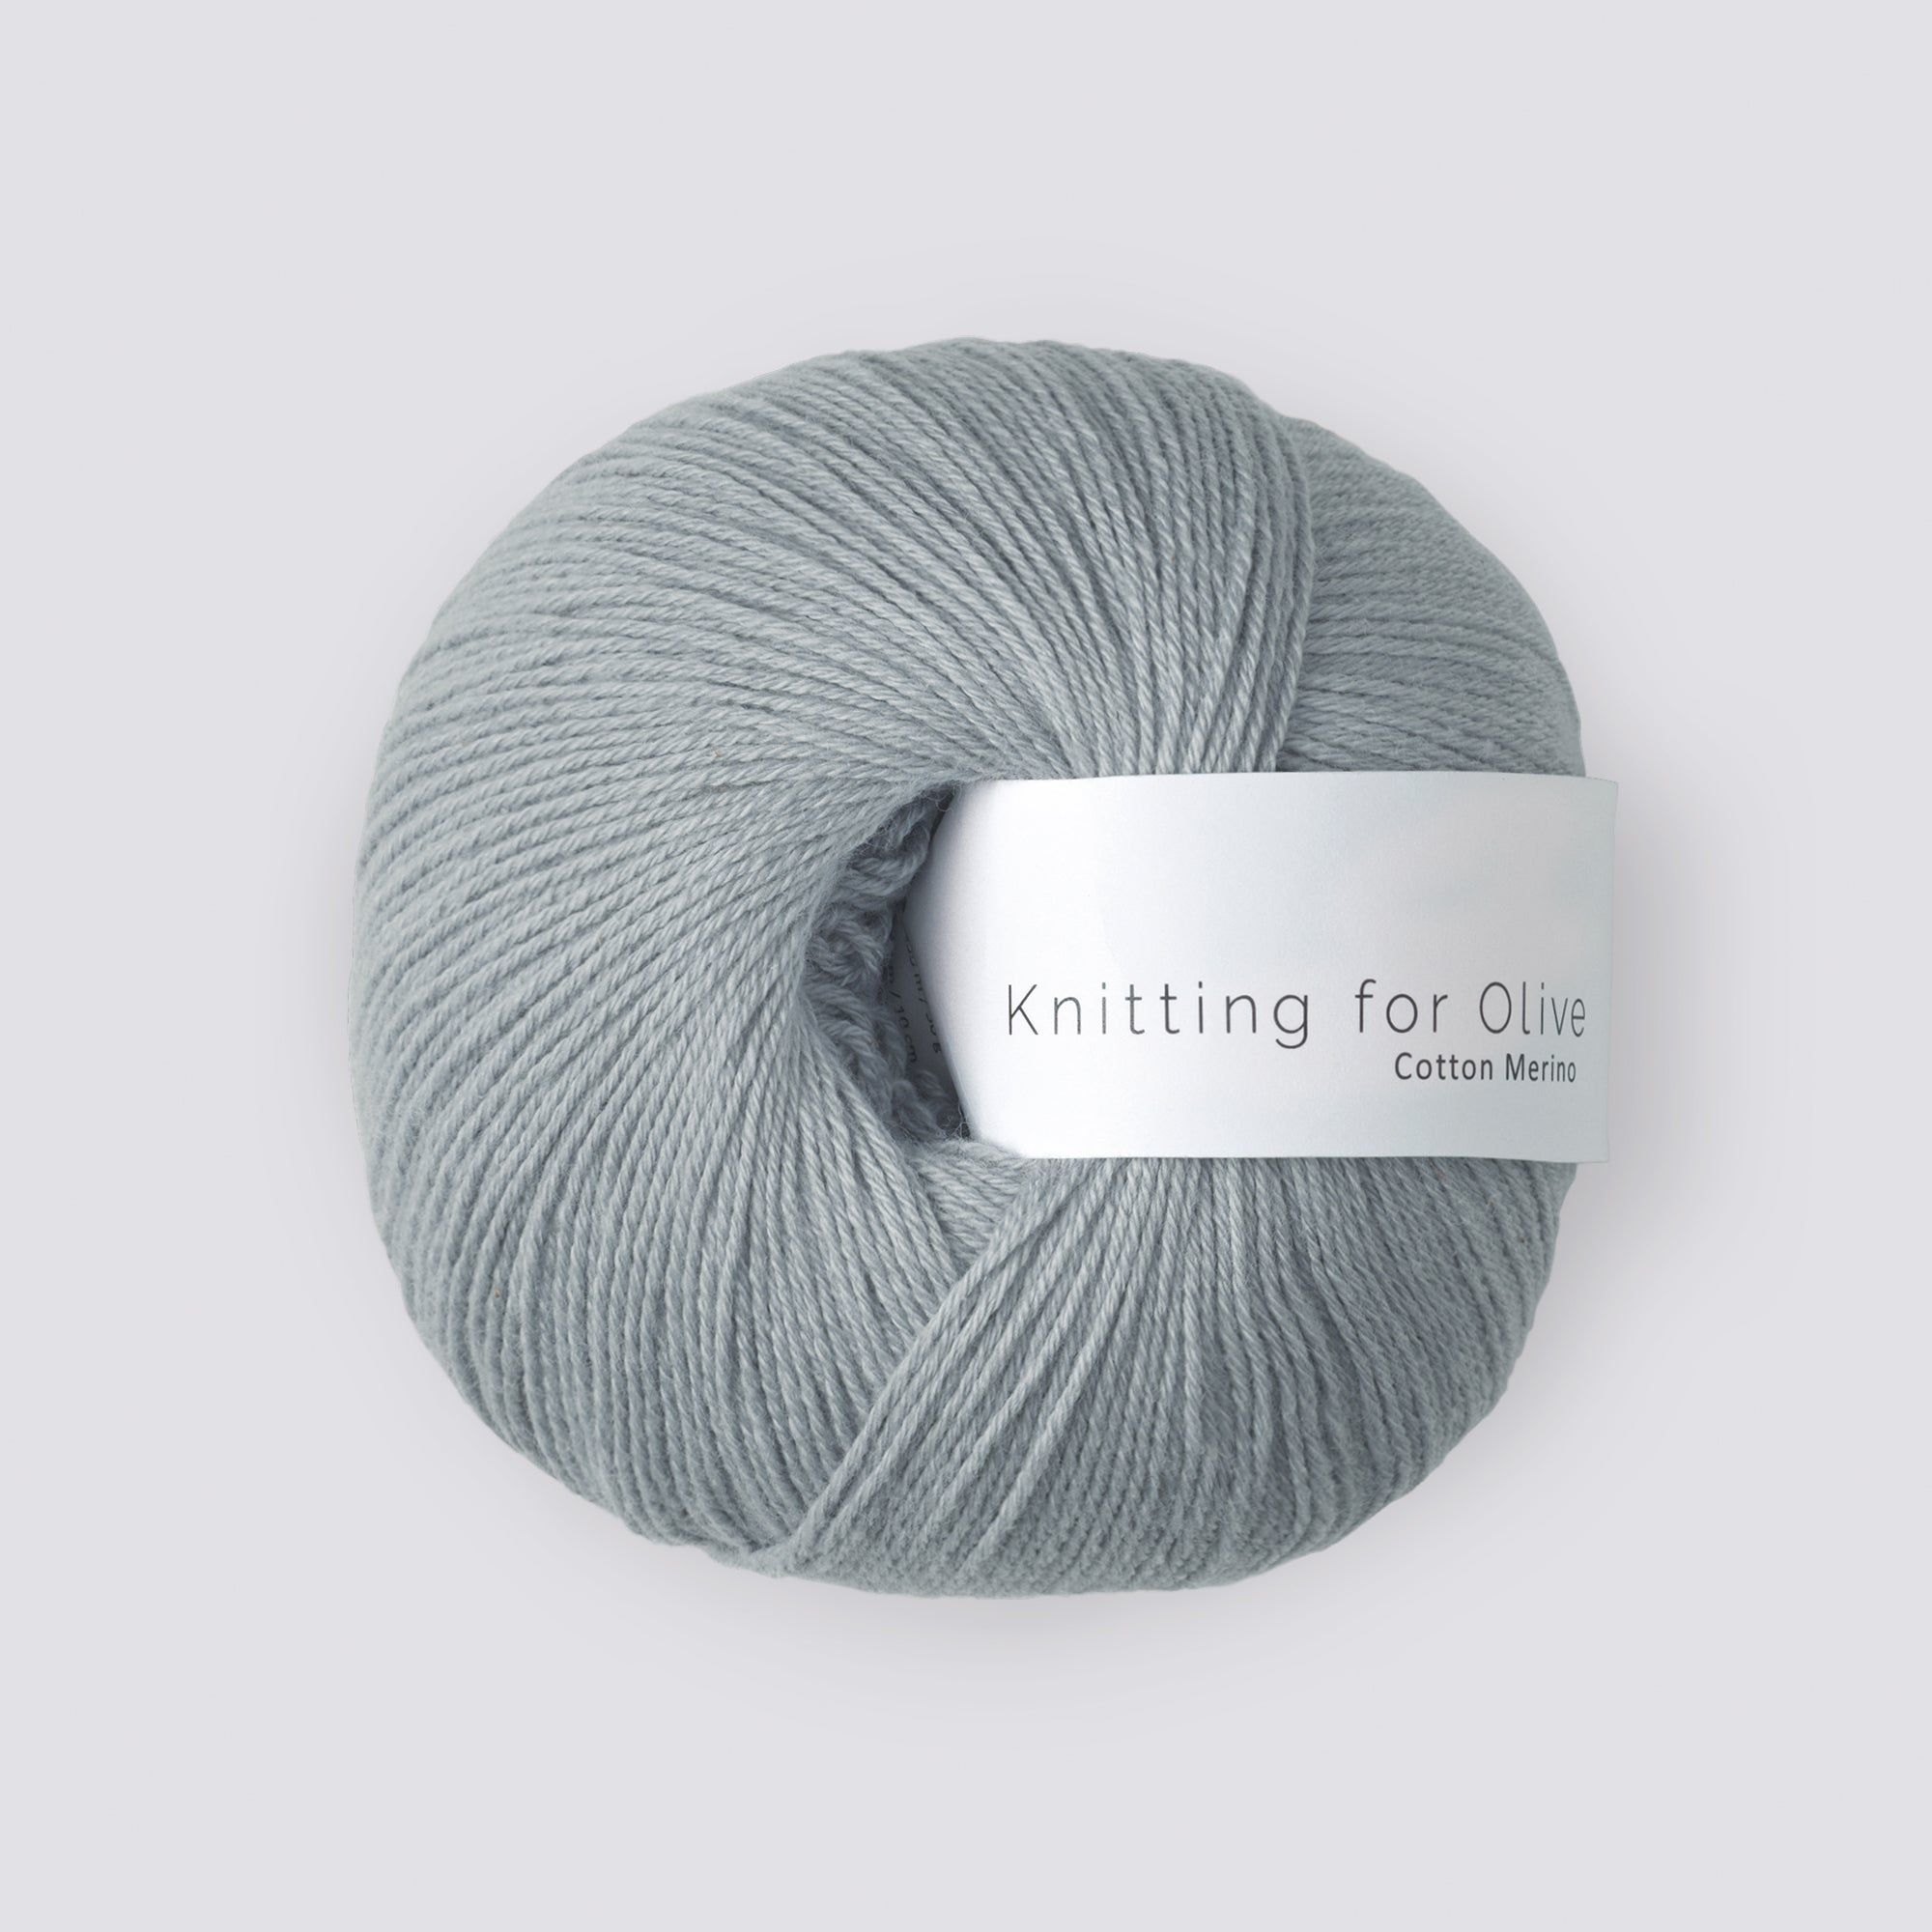 Knitting for Olive Cotton Merino - Weiches Blau